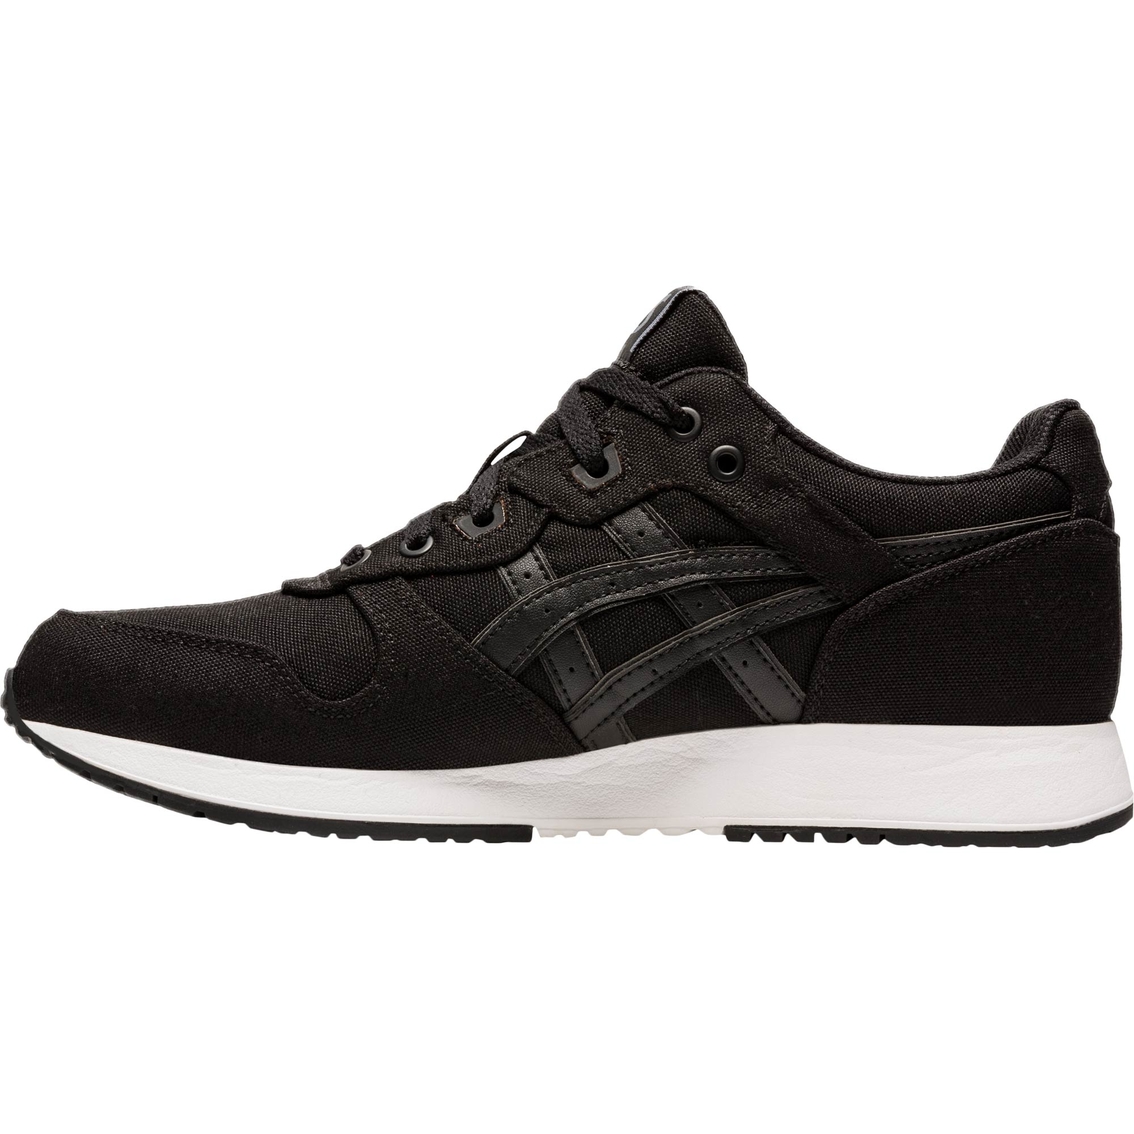 Asics Men's Lyte Classic Sneakers | Sneakers | Shoes | Shop The Exchange